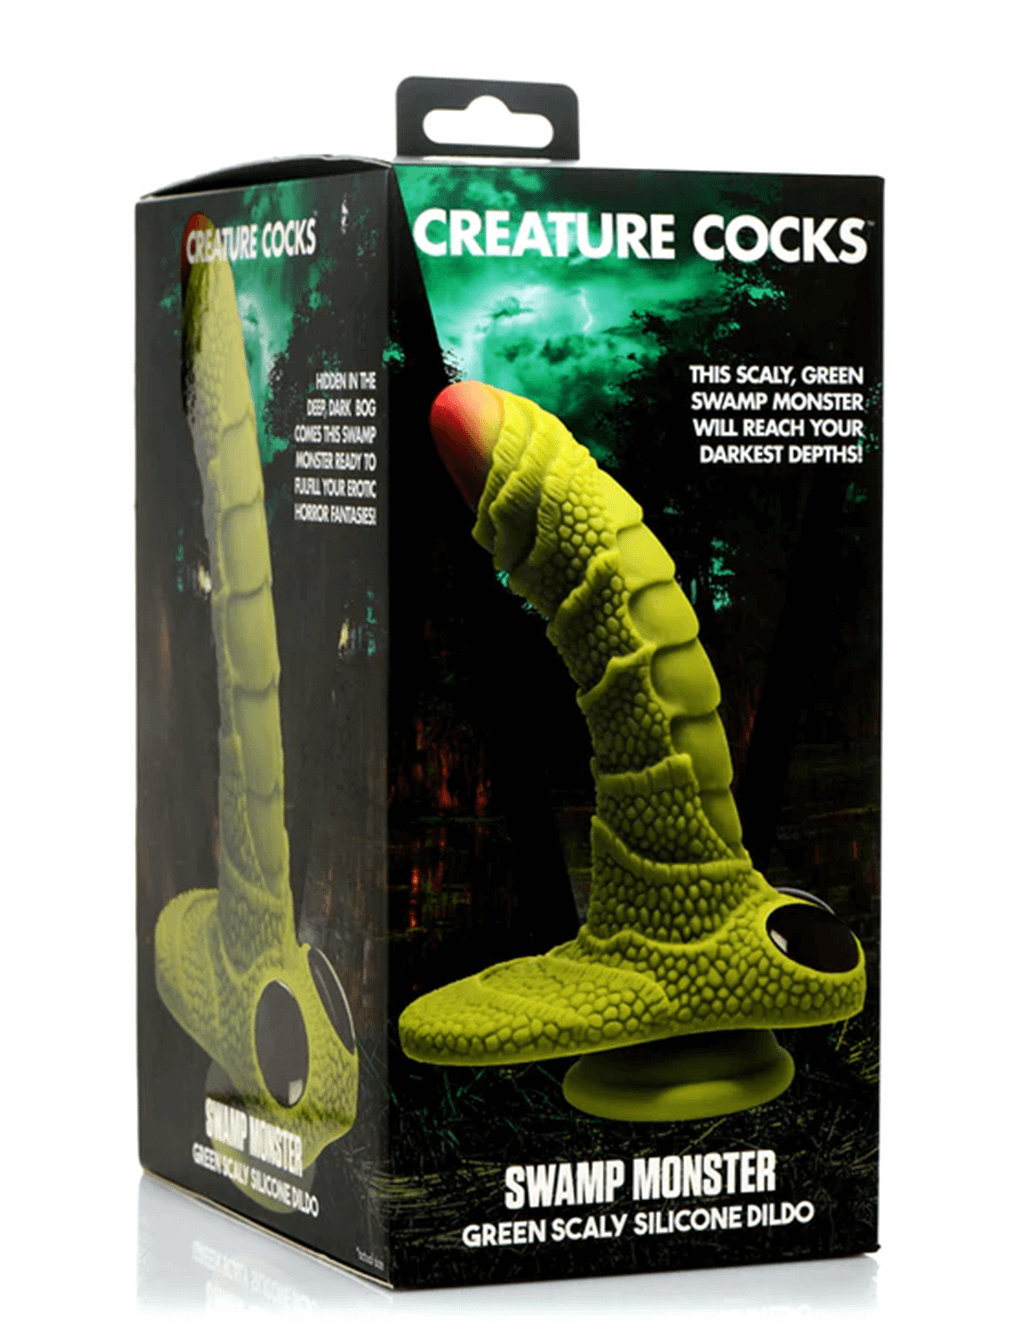 Swamp Monster Green Scaly Dildo Package